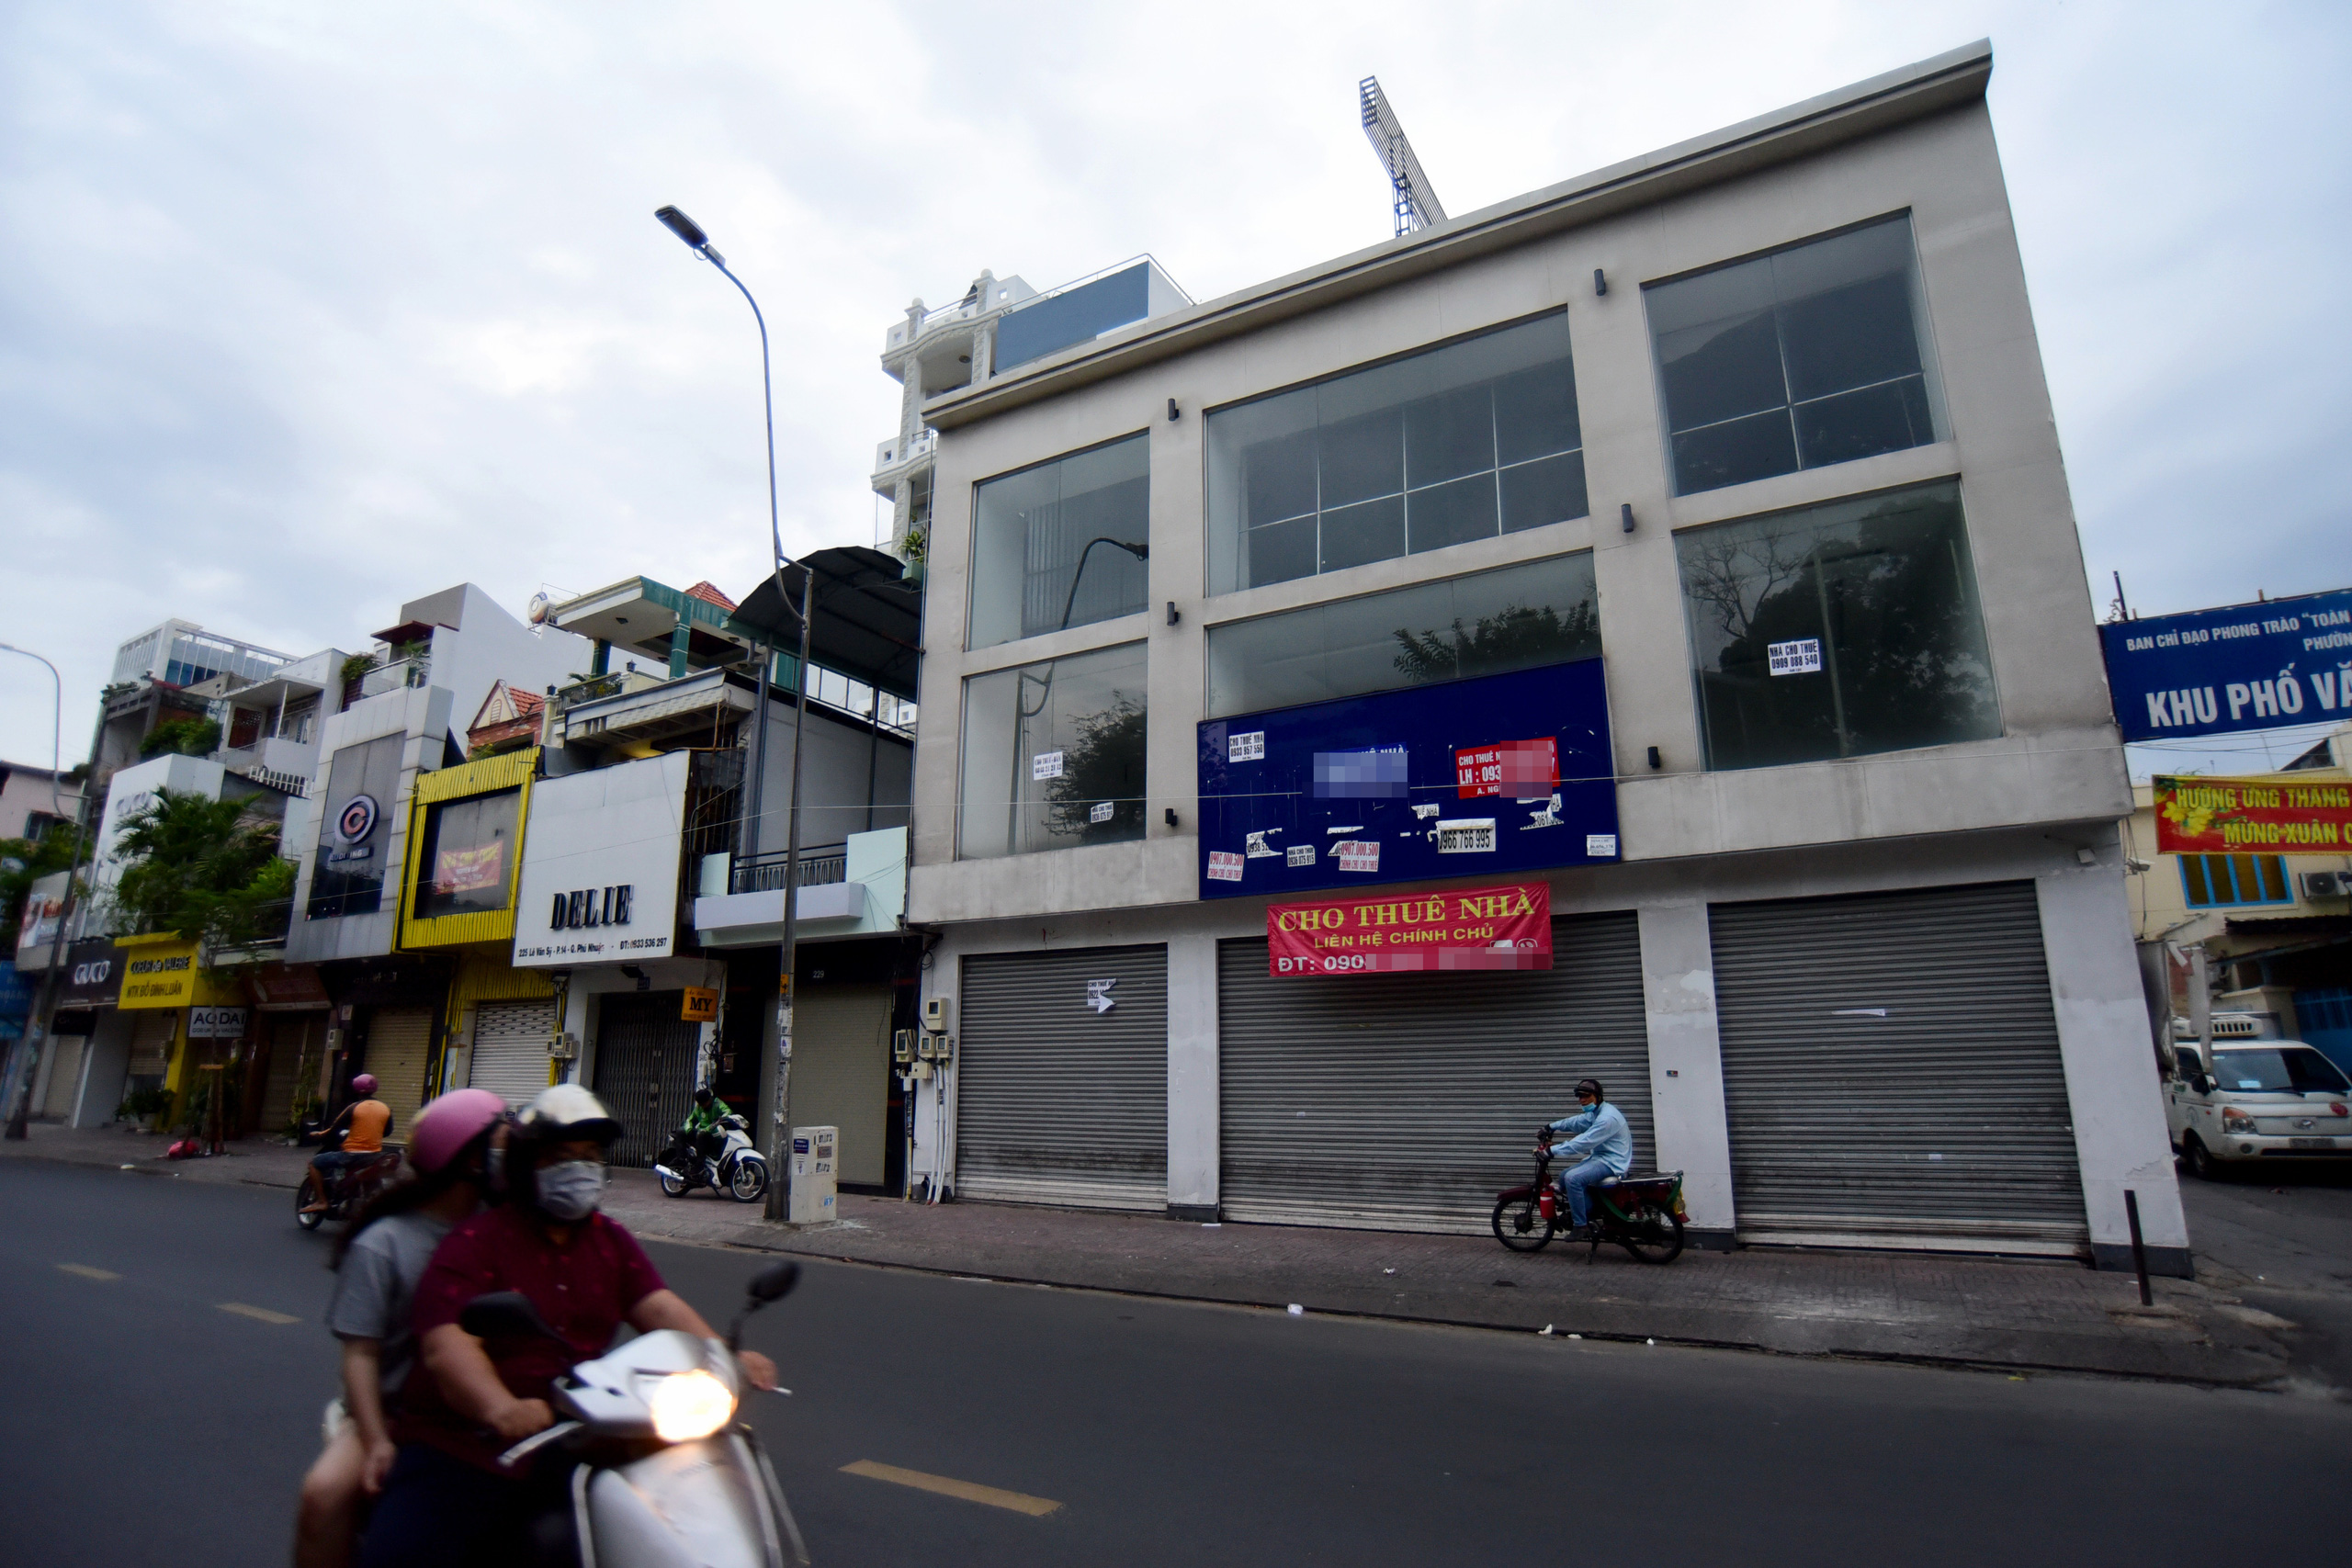 A commercial space is for rent on Le Van Sy Street in Phu Nhuan District, Ho Chi Minh City, April 15, 2020. Photo: Quang Dinh / Tuoi Tre